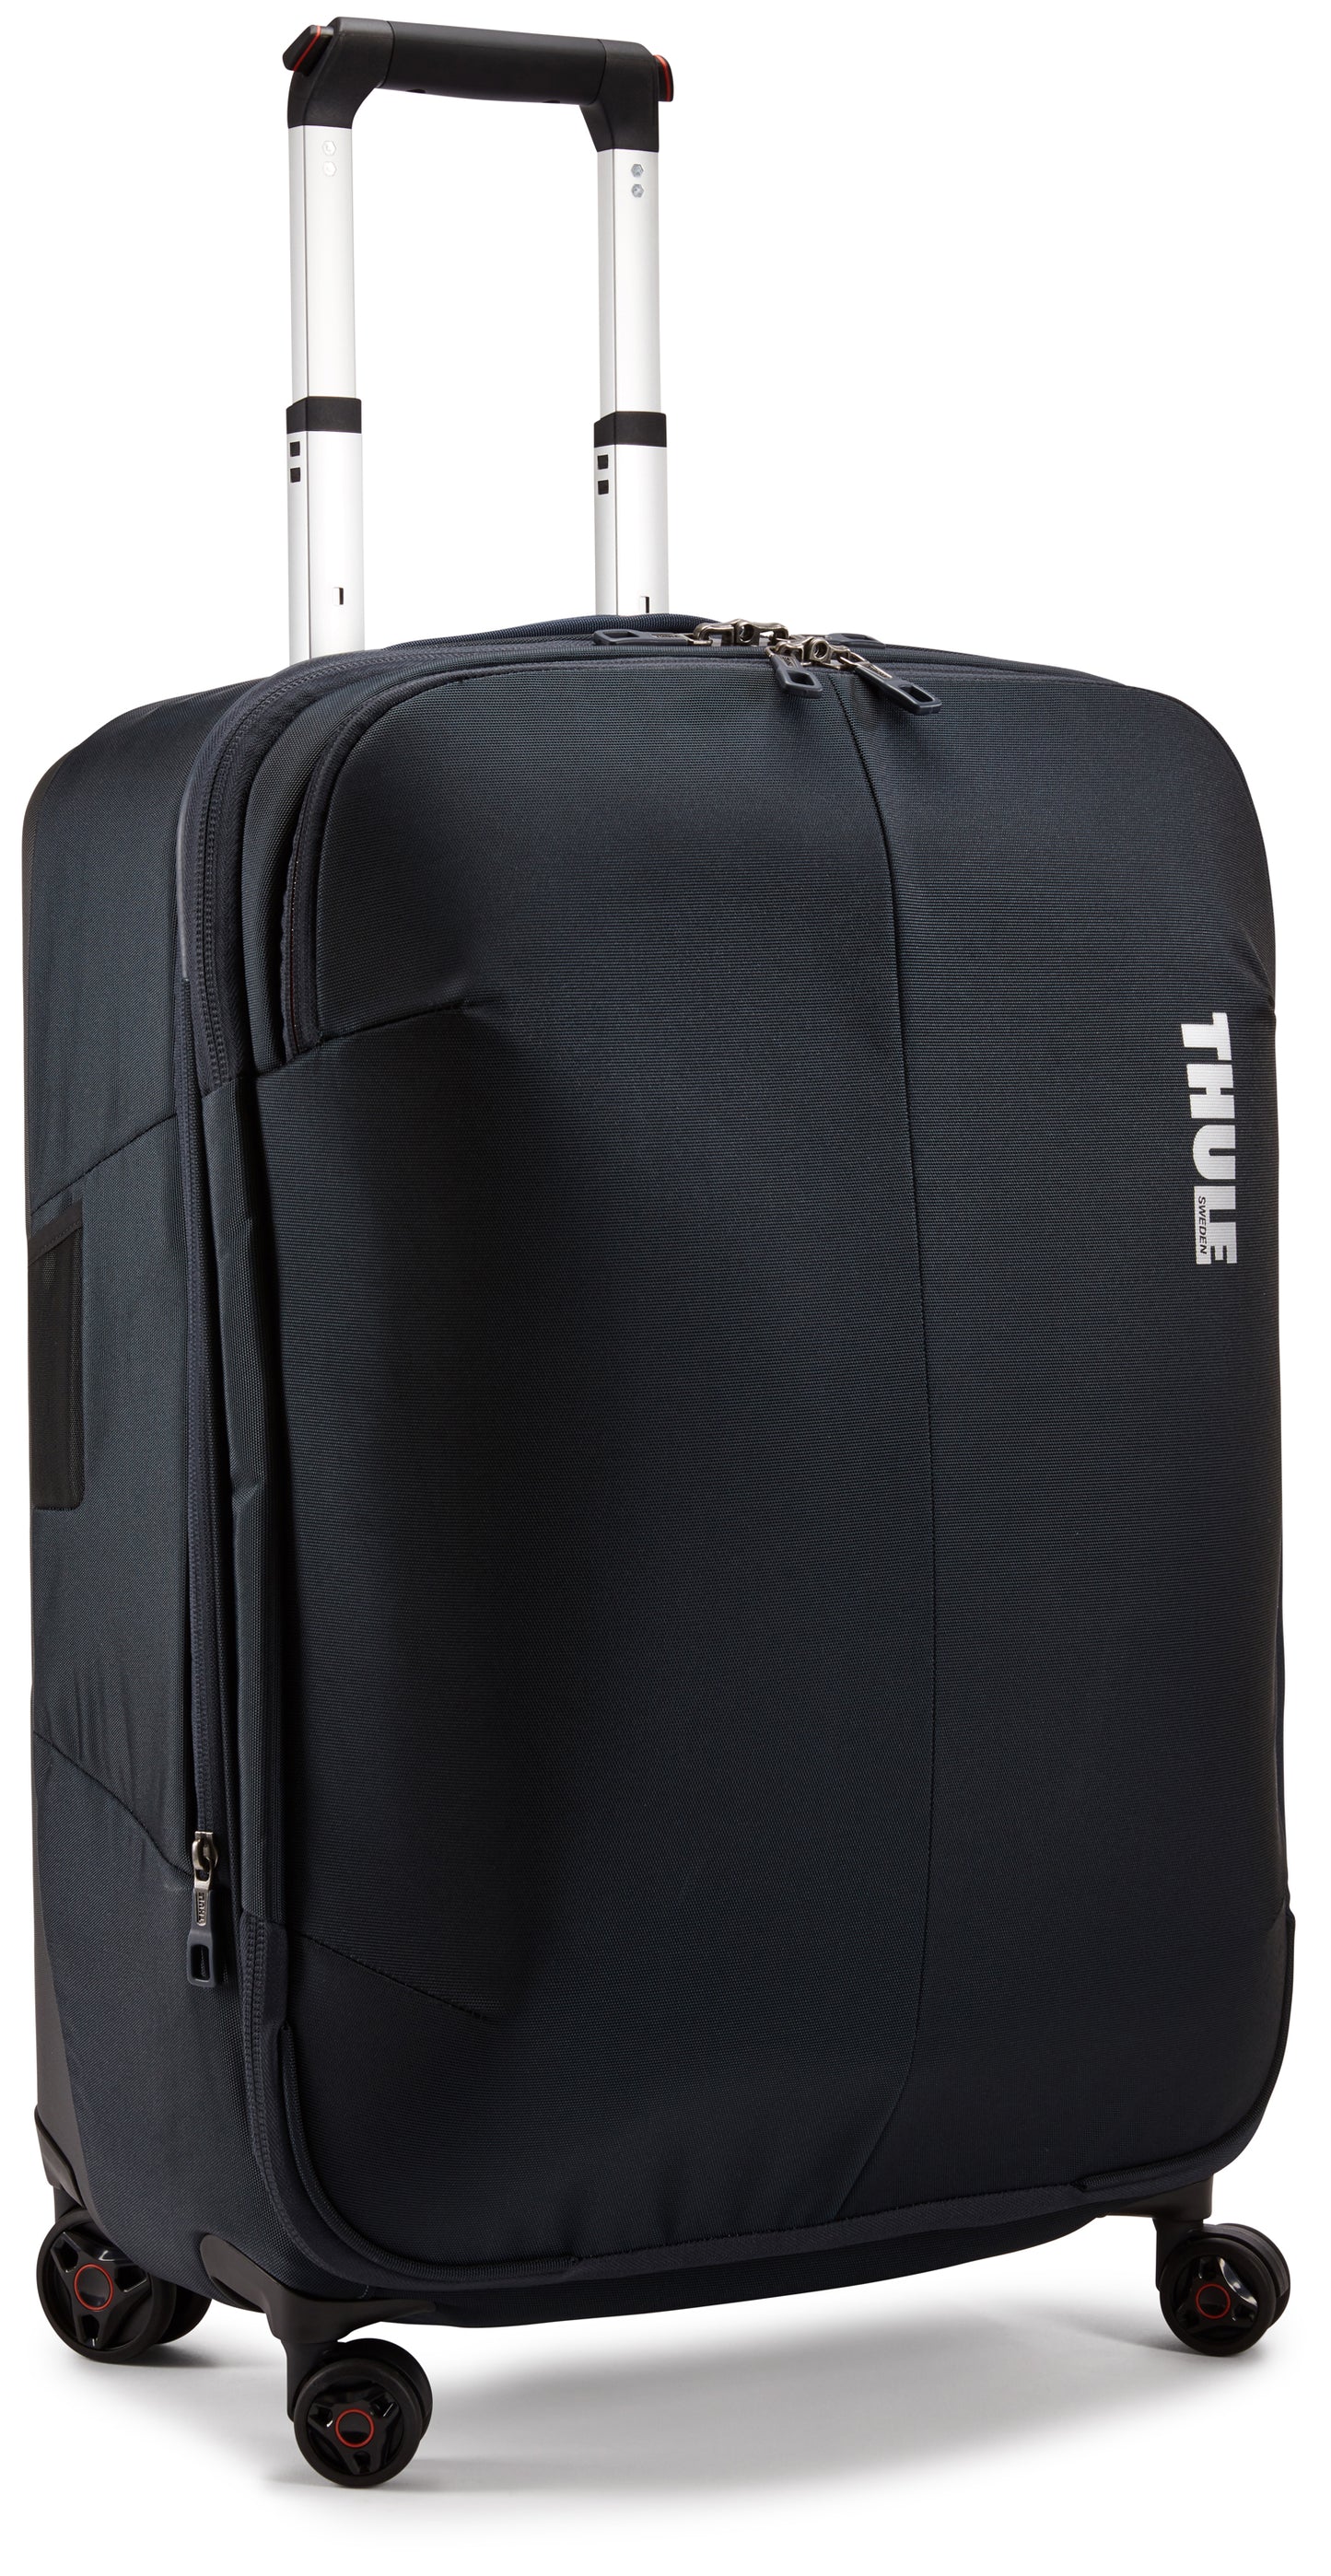 Suitcase Thule Subterra Spinner 63L Mineral TSRS-325